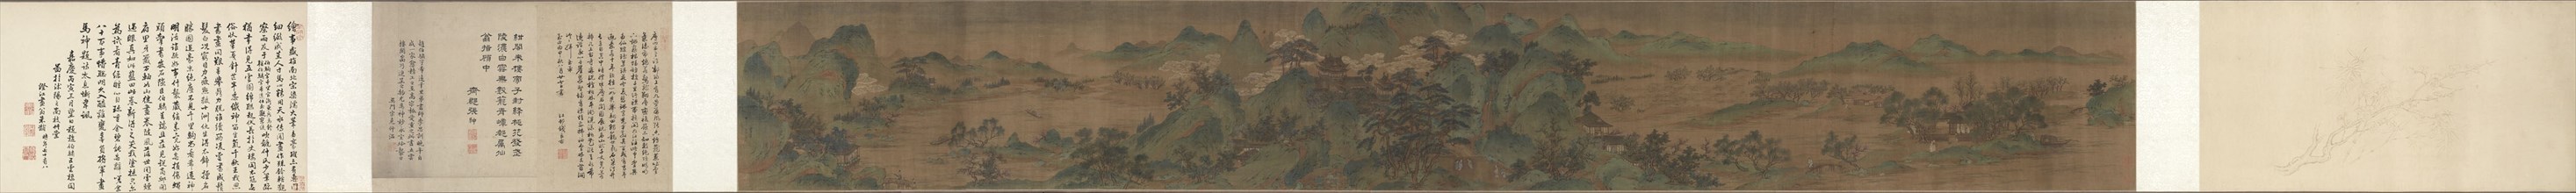 Landscape, The Palace of the Clouds, 1644-1911. China, Qing dynasty (1644-1911). Handscroll, ink on